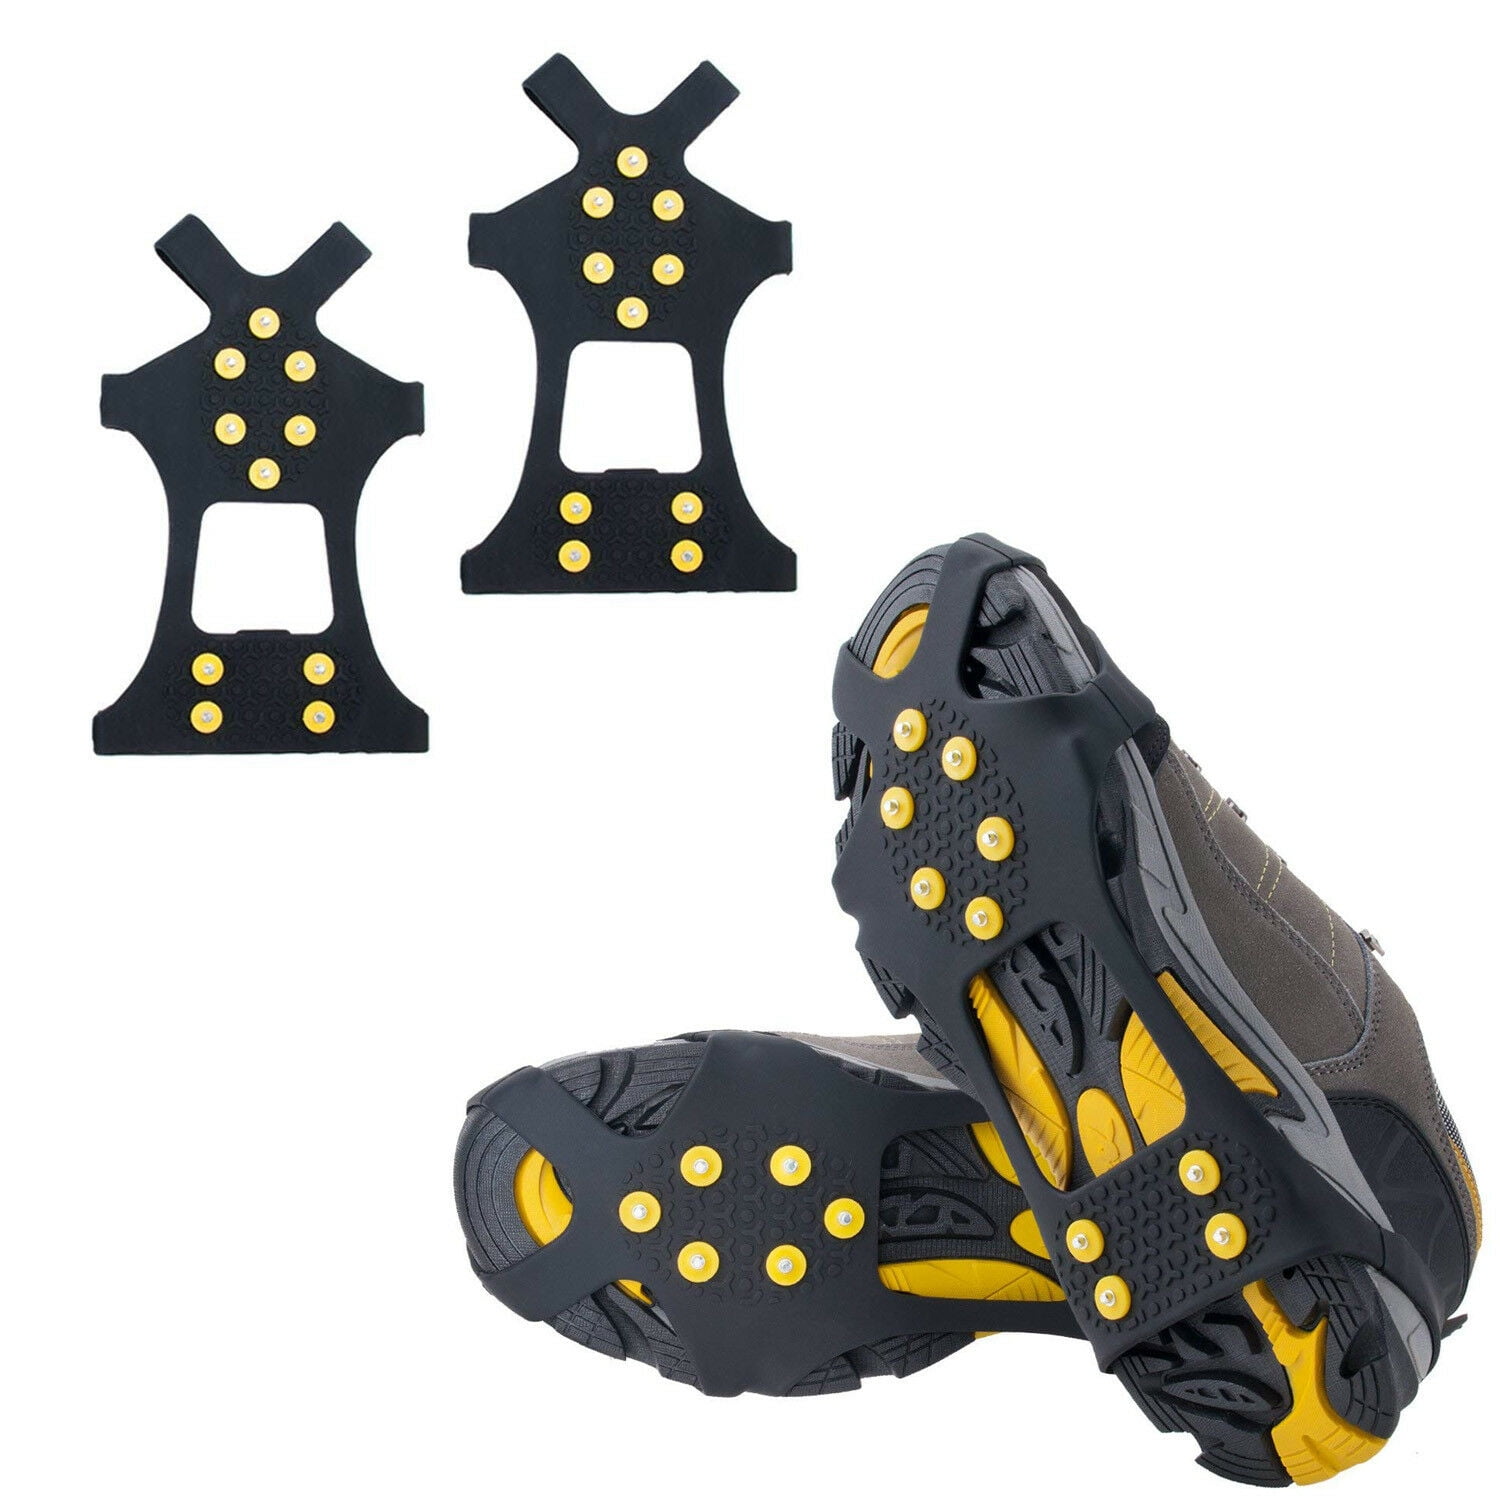 Grips Grippers Crampon Cleats For Boots Overshoe USA Ice Snow Anti Slip Spikes 